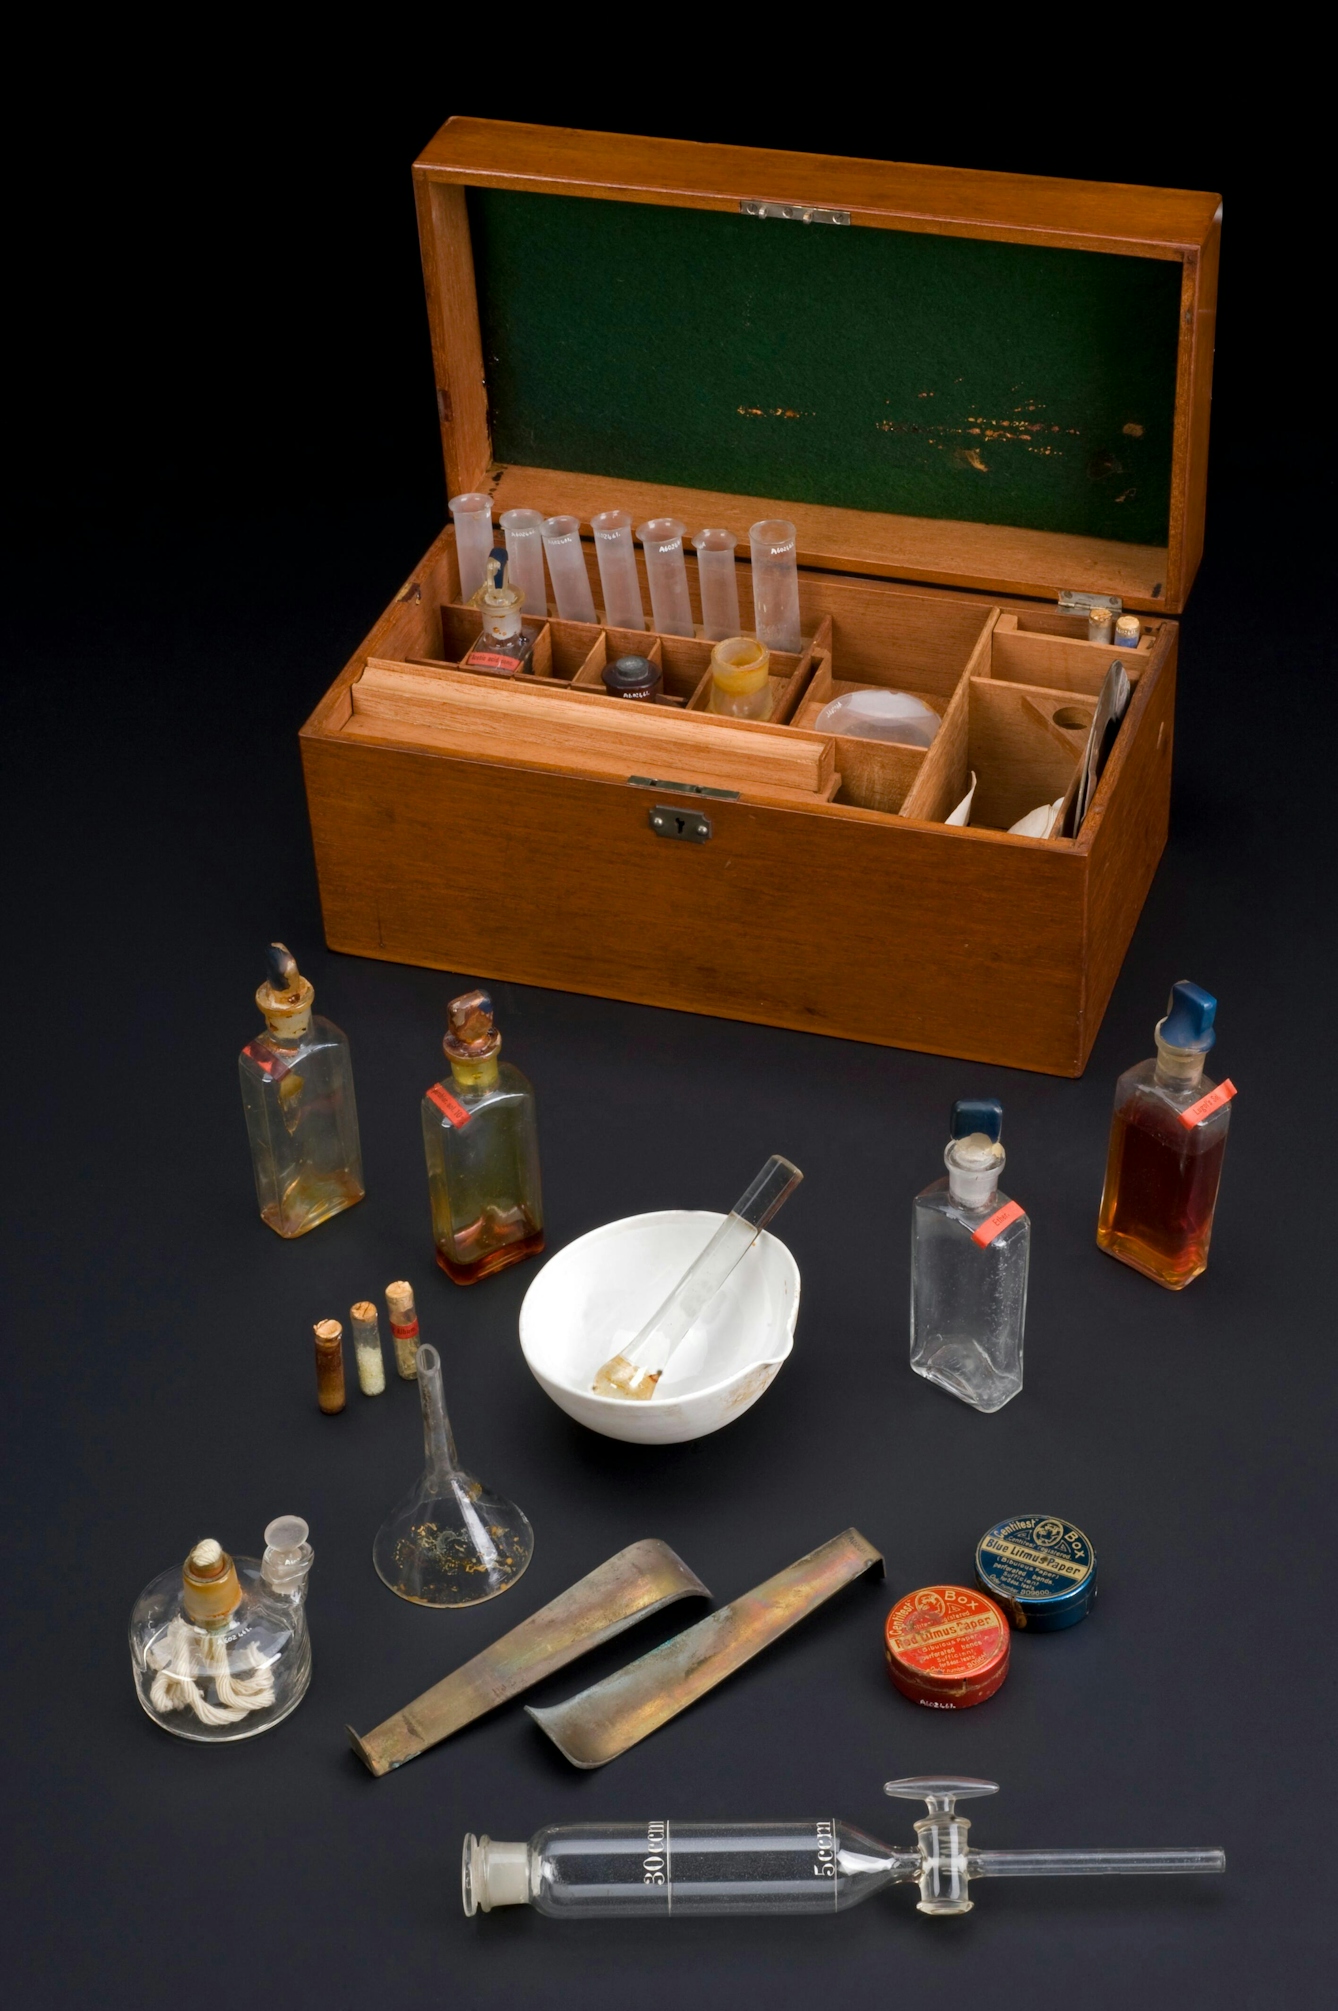 Colour photograph showing a Victorian chemistry set. The wooden storage box is open, and various chemicals and equipment are displayed in front of it, including glass bottles and tubes, round tins, and a mortar and pestle.